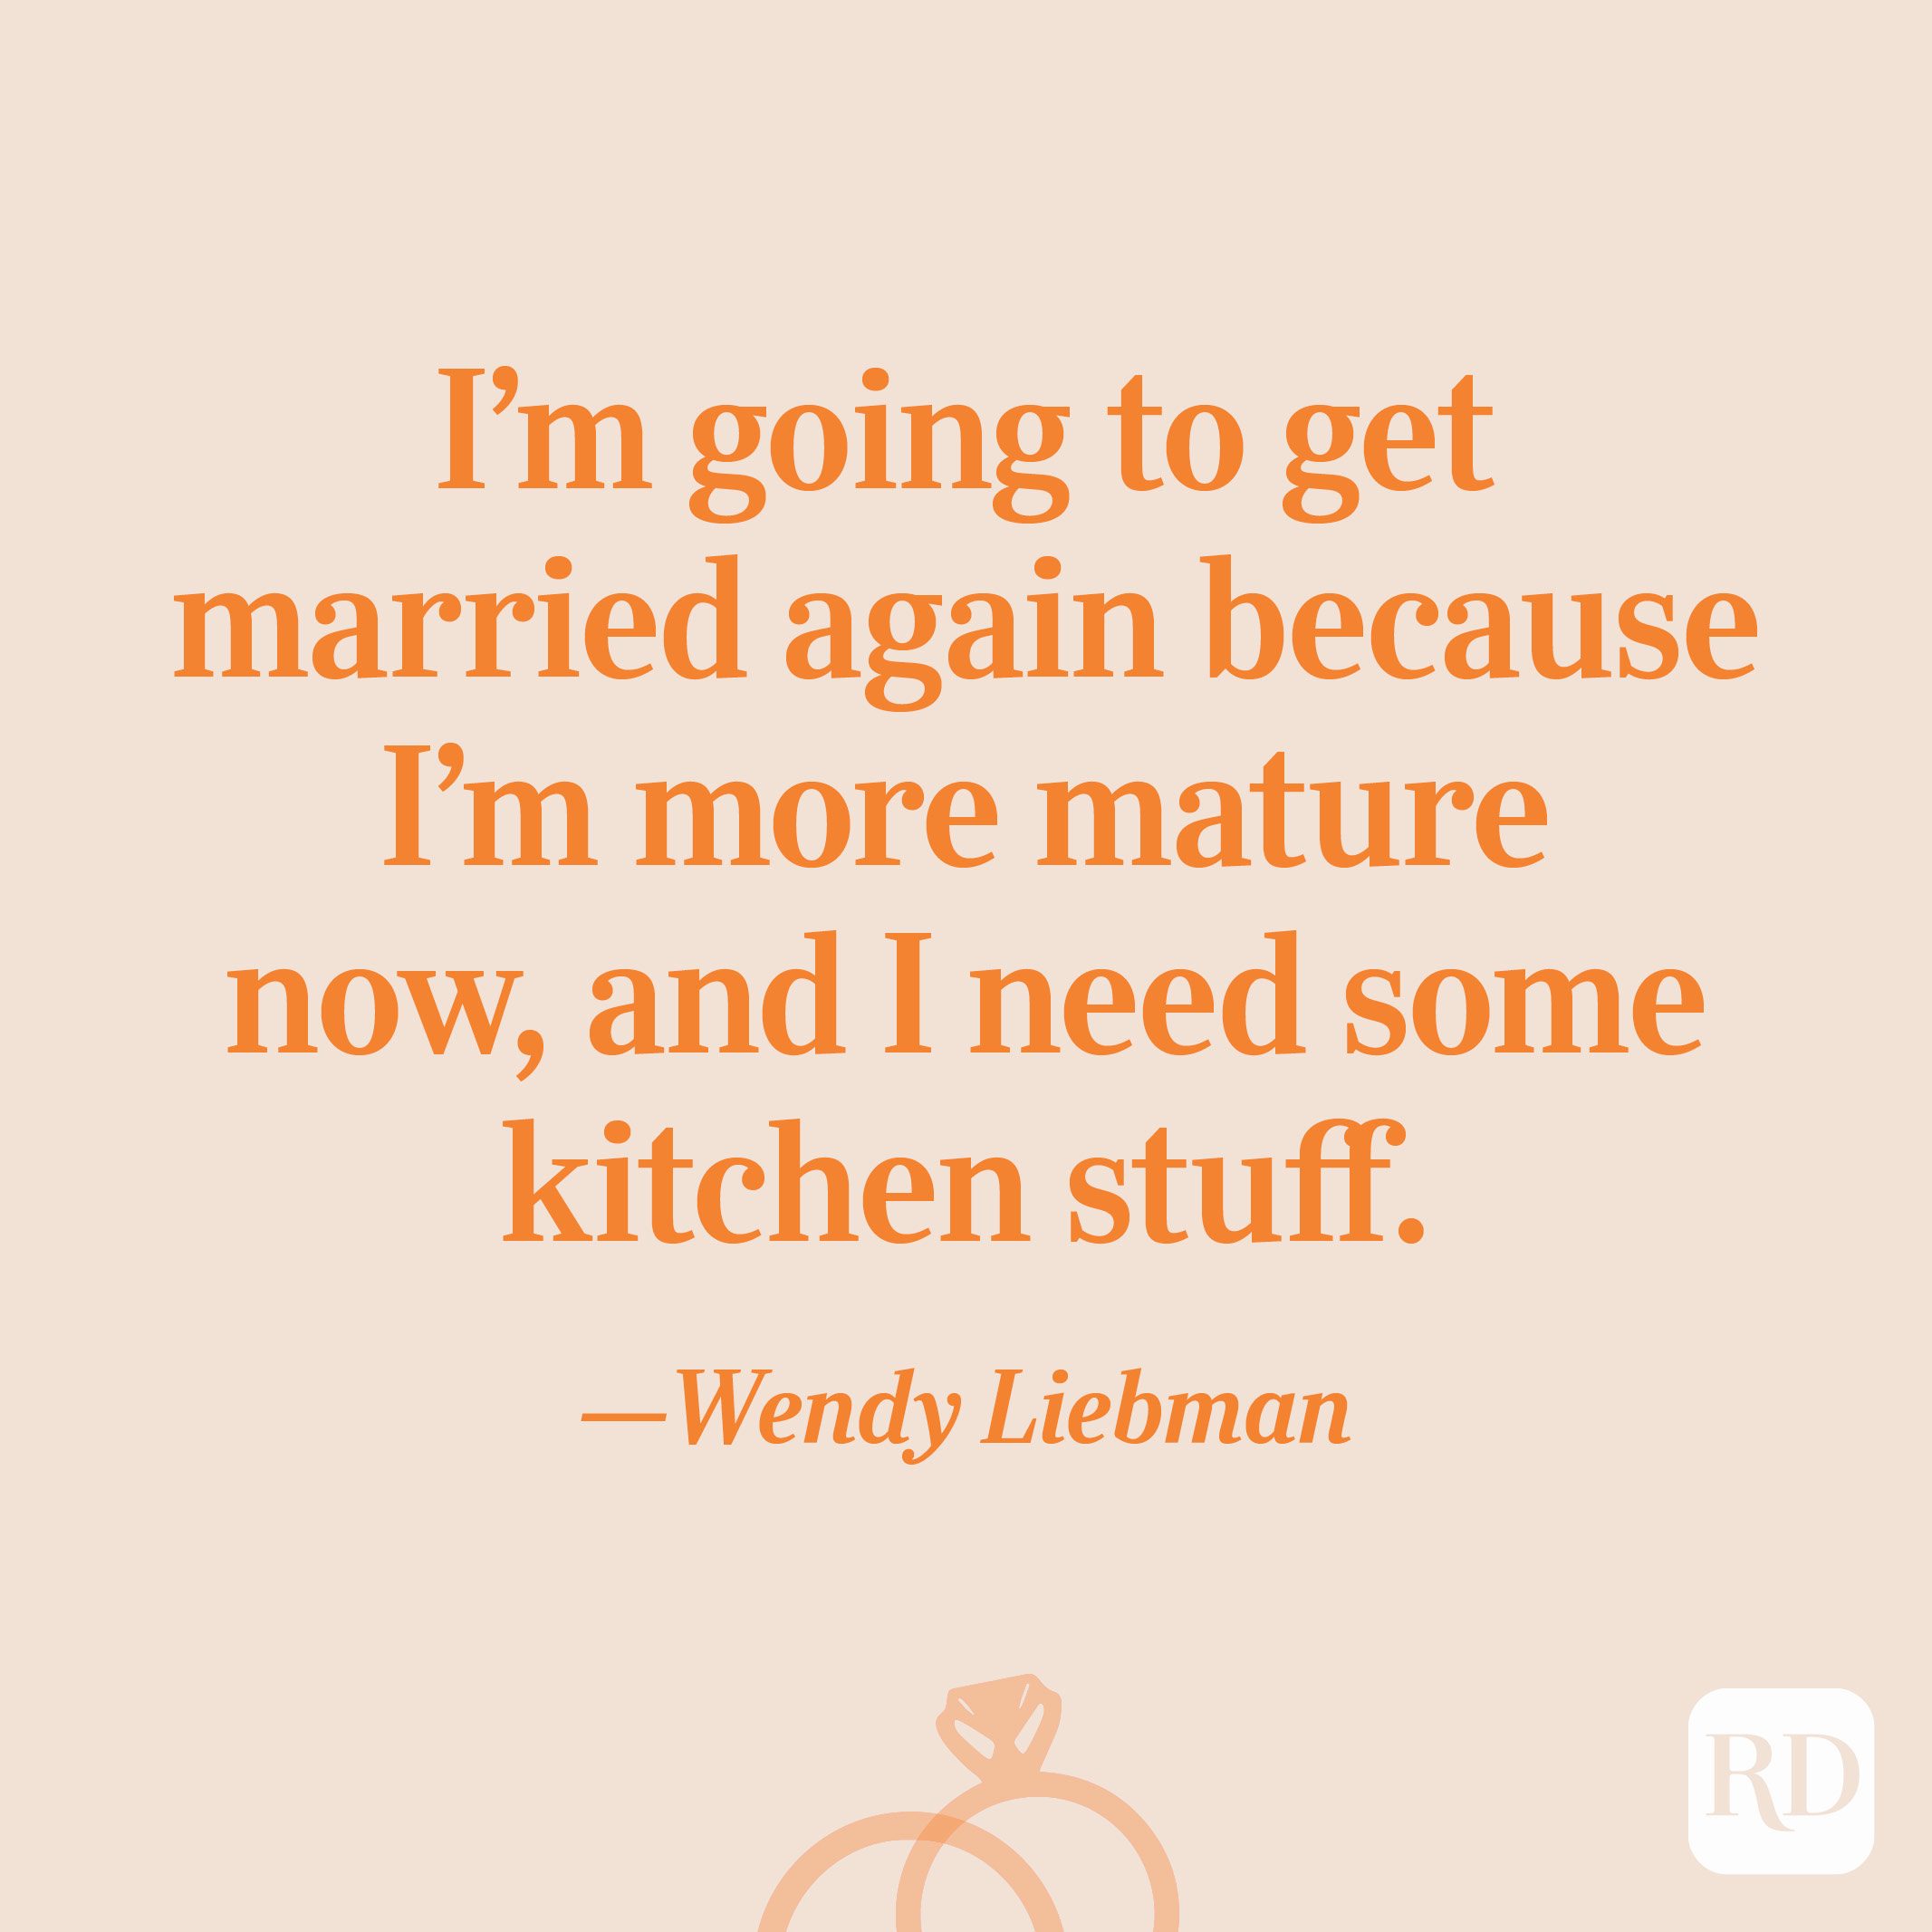 “I'm going to get married again because I'm more mature now, and I need some kitchen stuff.”—Wendy Liebman